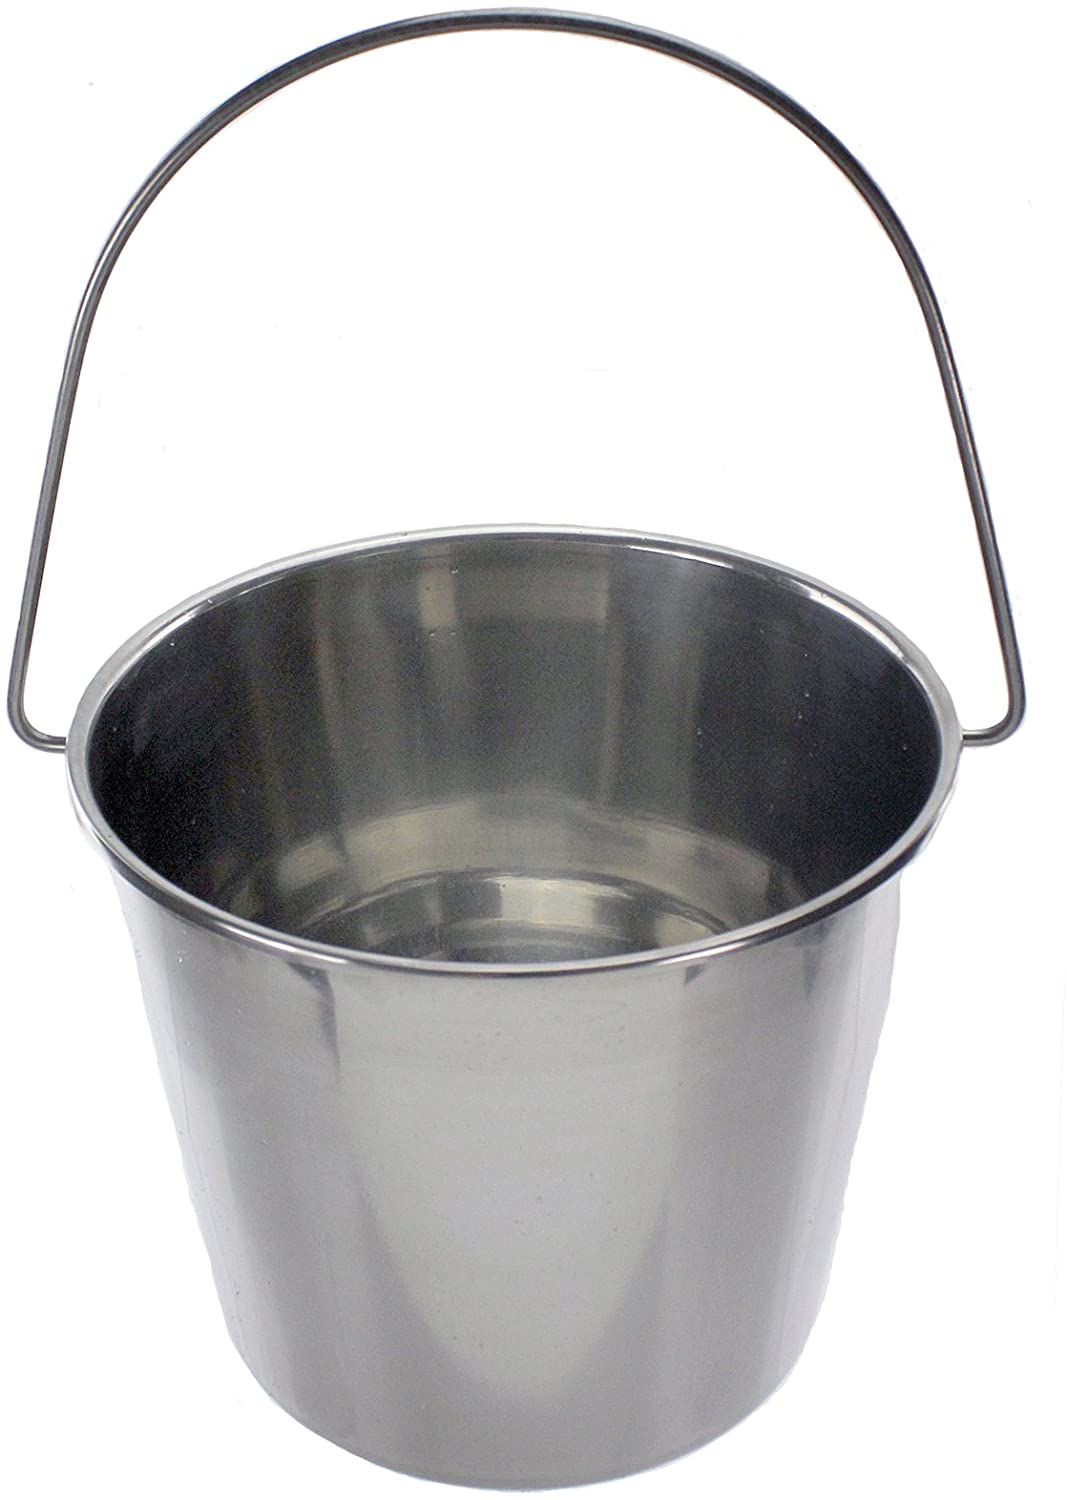 12 Litre Stainless Steel Pail Bucket with Handle for Catering (Silver, Pack of 5 Buckets)